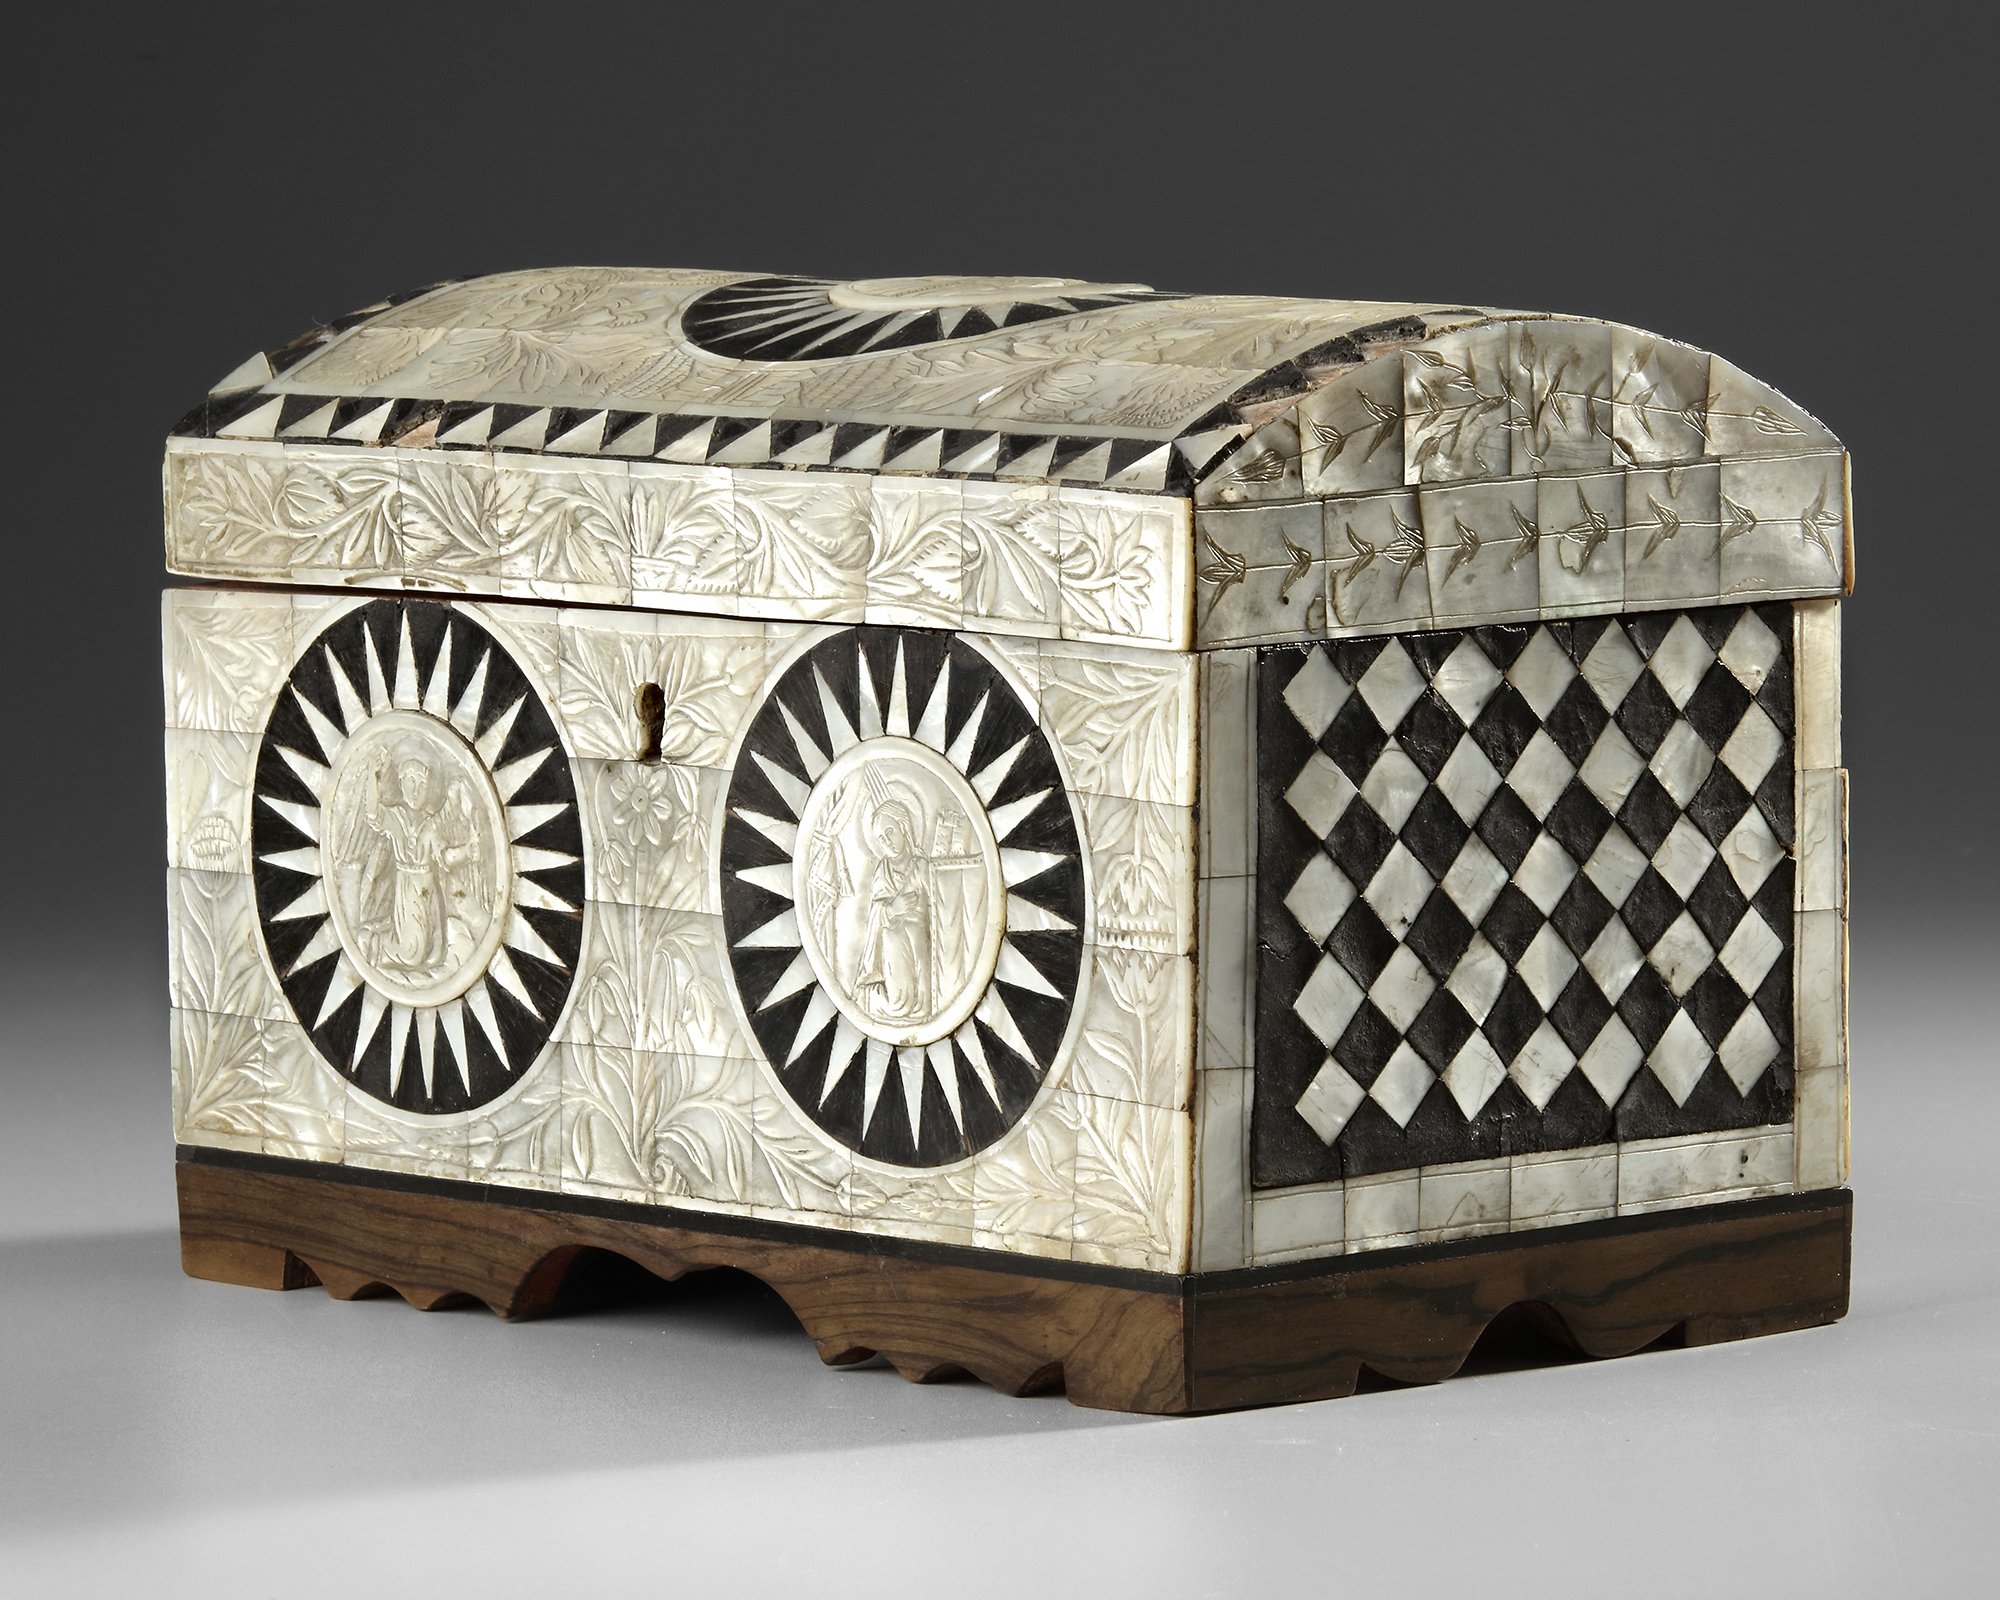 AN OTTOMAN MOTHER OF PEARL INLAID WOODEN BOX, TURKEY PROVINCES, 19TH CENTURY - Image 2 of 5